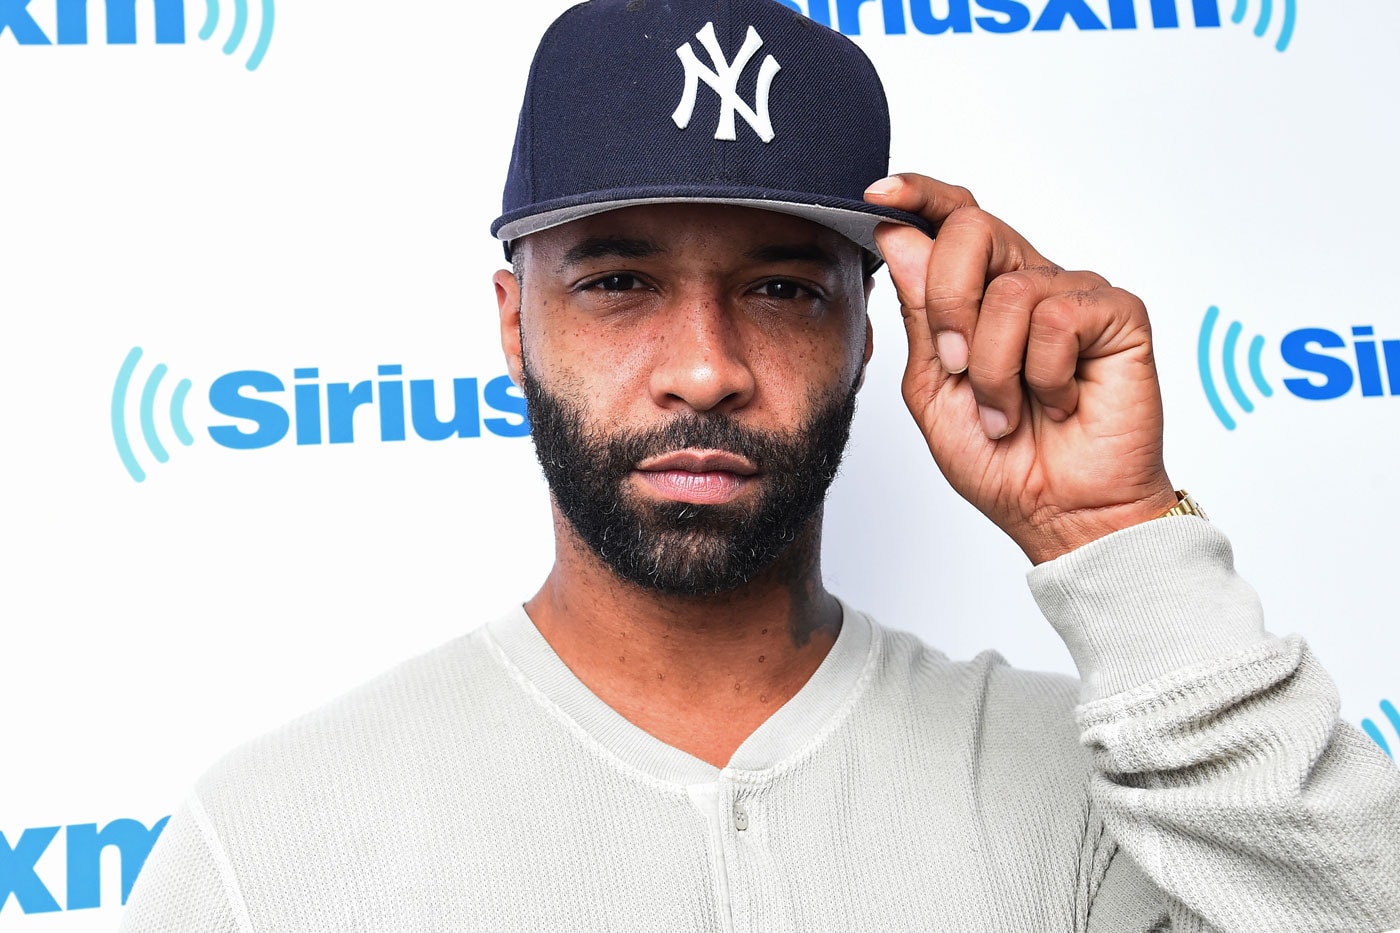 The Drake & Joe Budden Beef Now Has its Own Merchandise